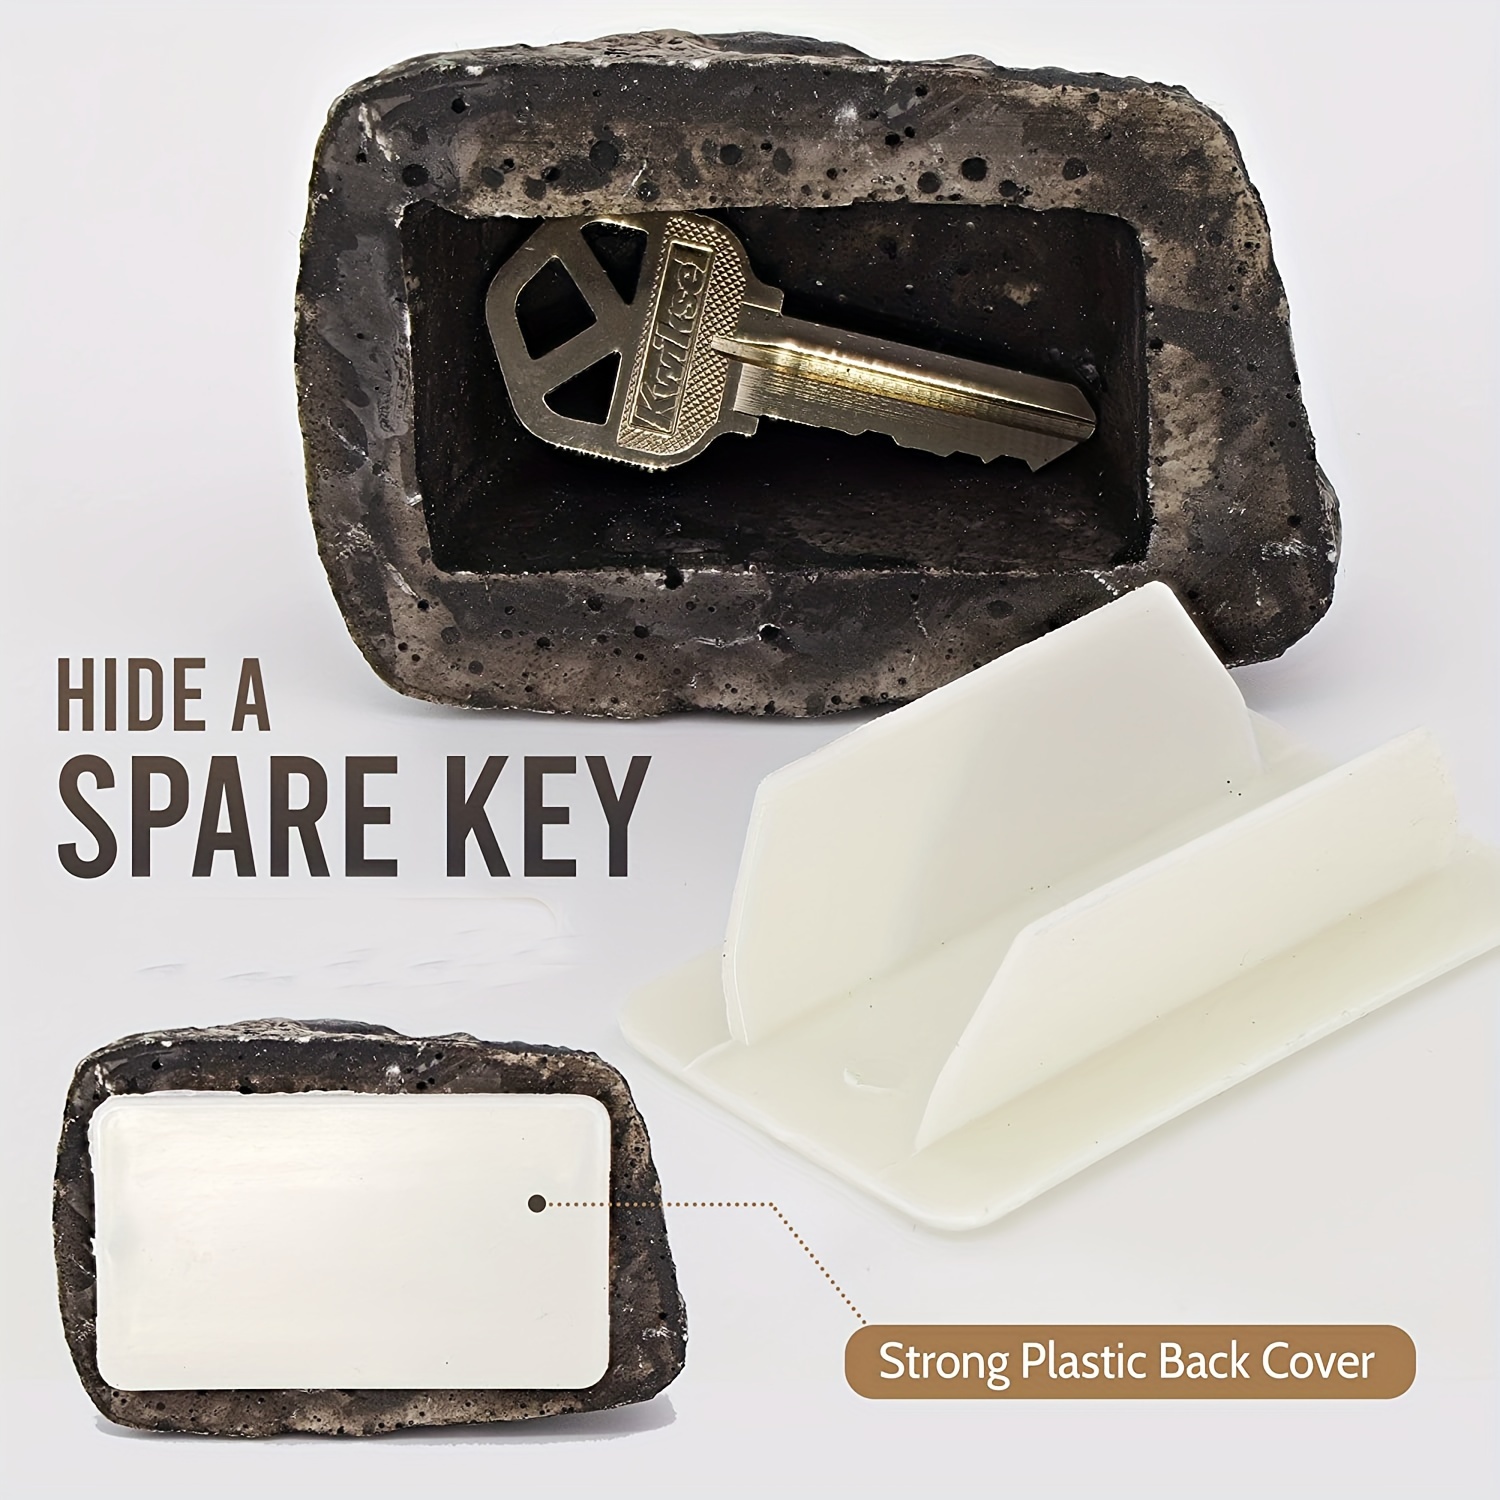 1pc Fake Stone Key Hider, Decorative Stone Shaped Spare Key Box, Never Get  Locked Outside Again, Outdoor Furniture Accessories